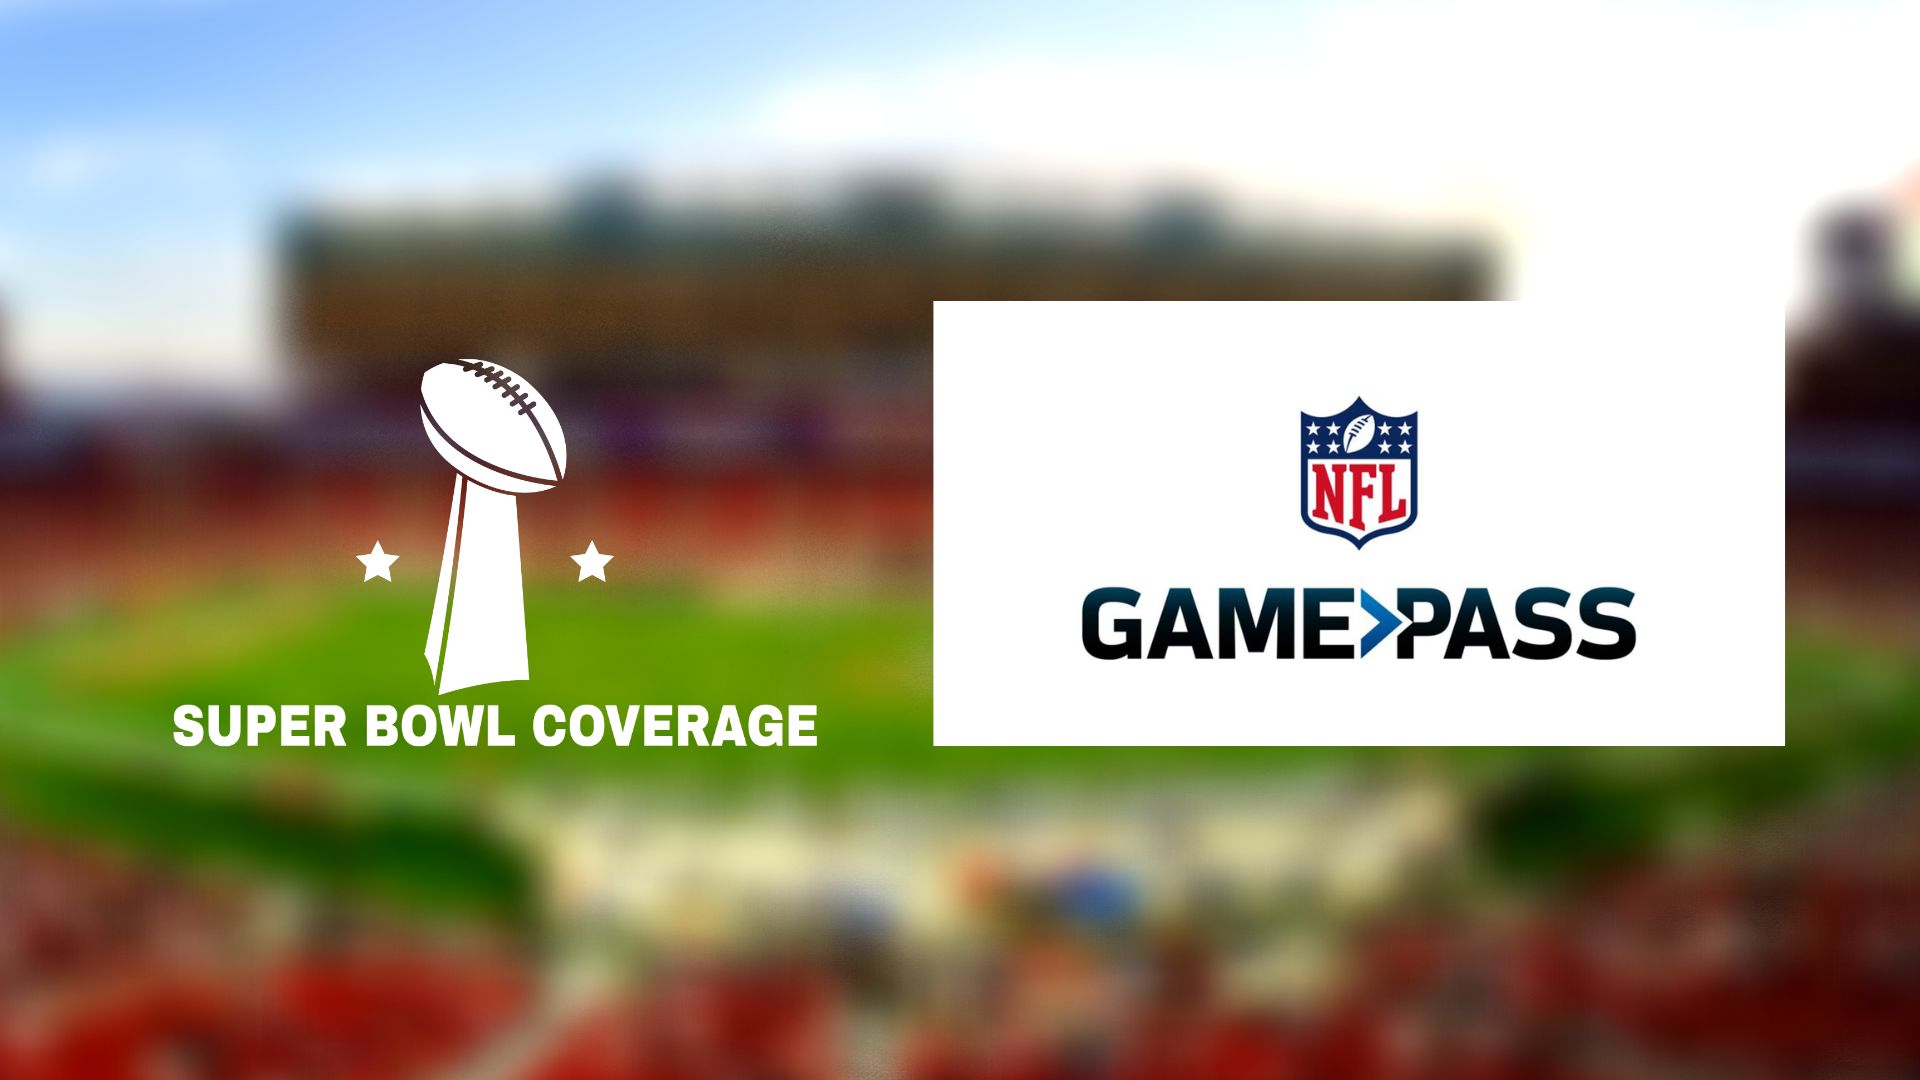 How to Watch Super Bowl On NFL Game Pass